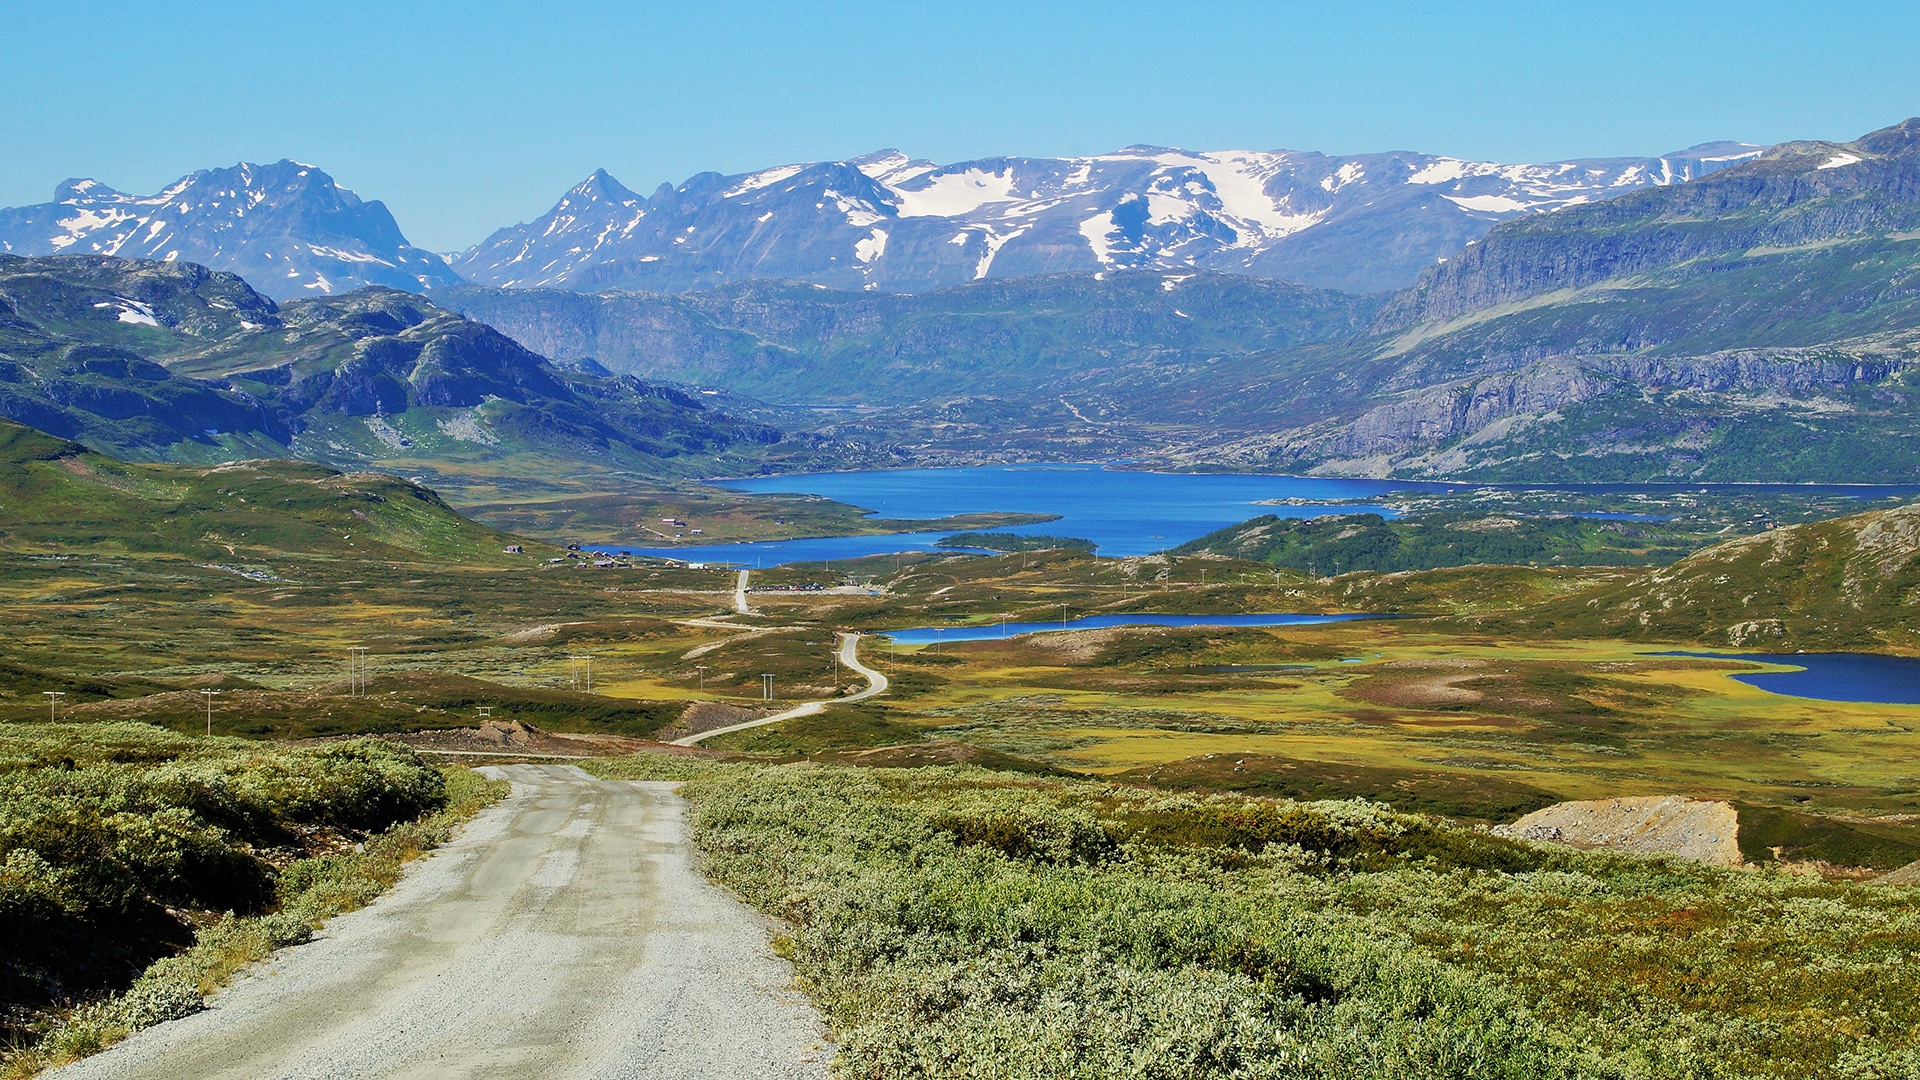 The winding dirt road Slettefjellvegen with snow covered high mountains in the back.